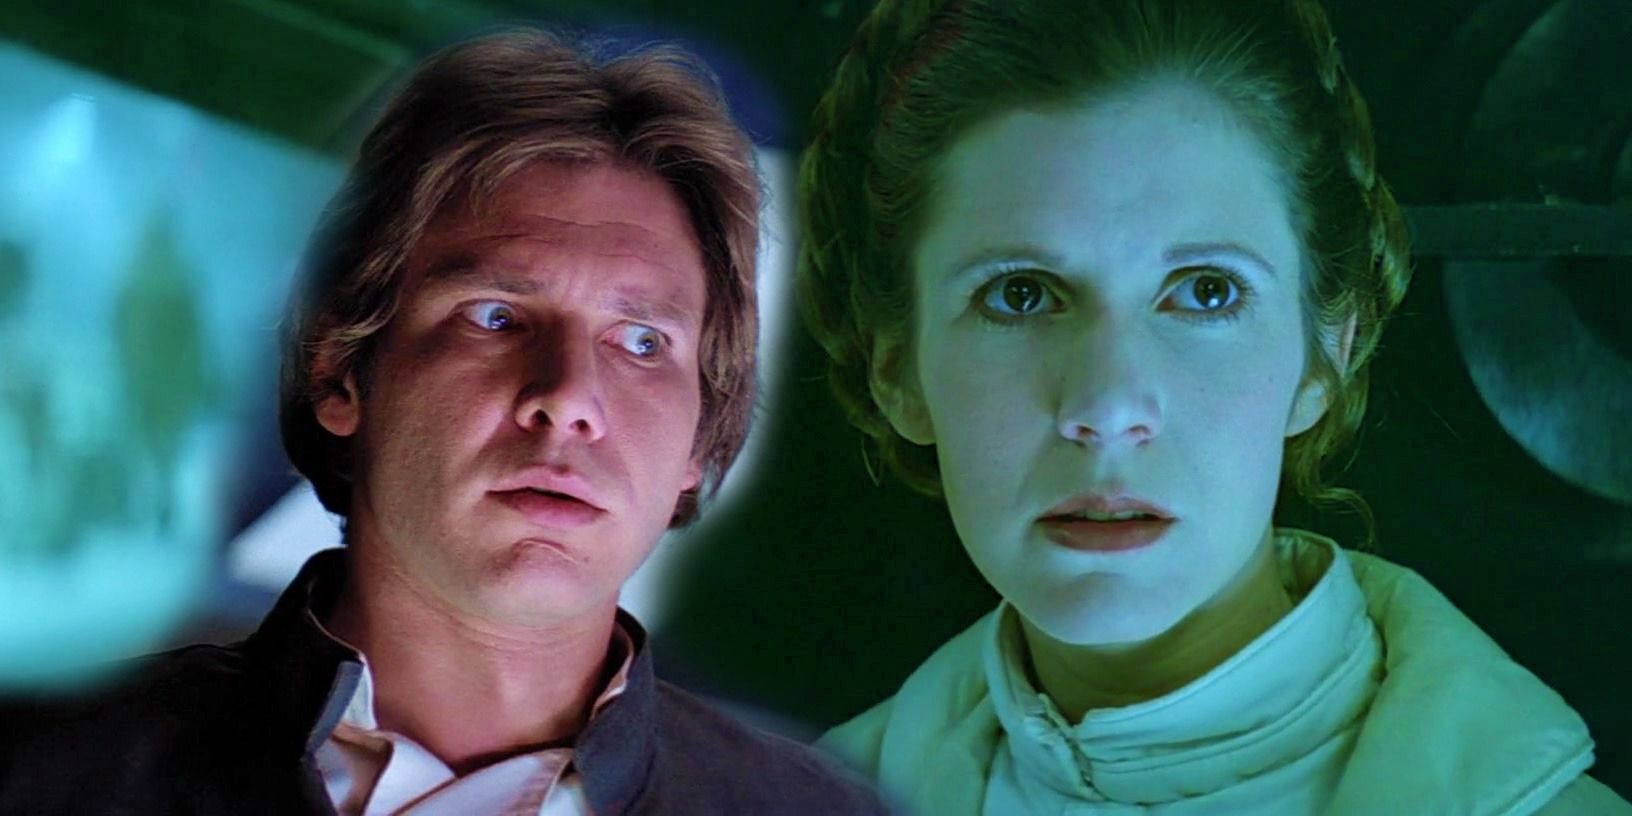 Han Solo looking shocked in The Empire Strikes Back to the left and Leia looking serious in a green hue to the right